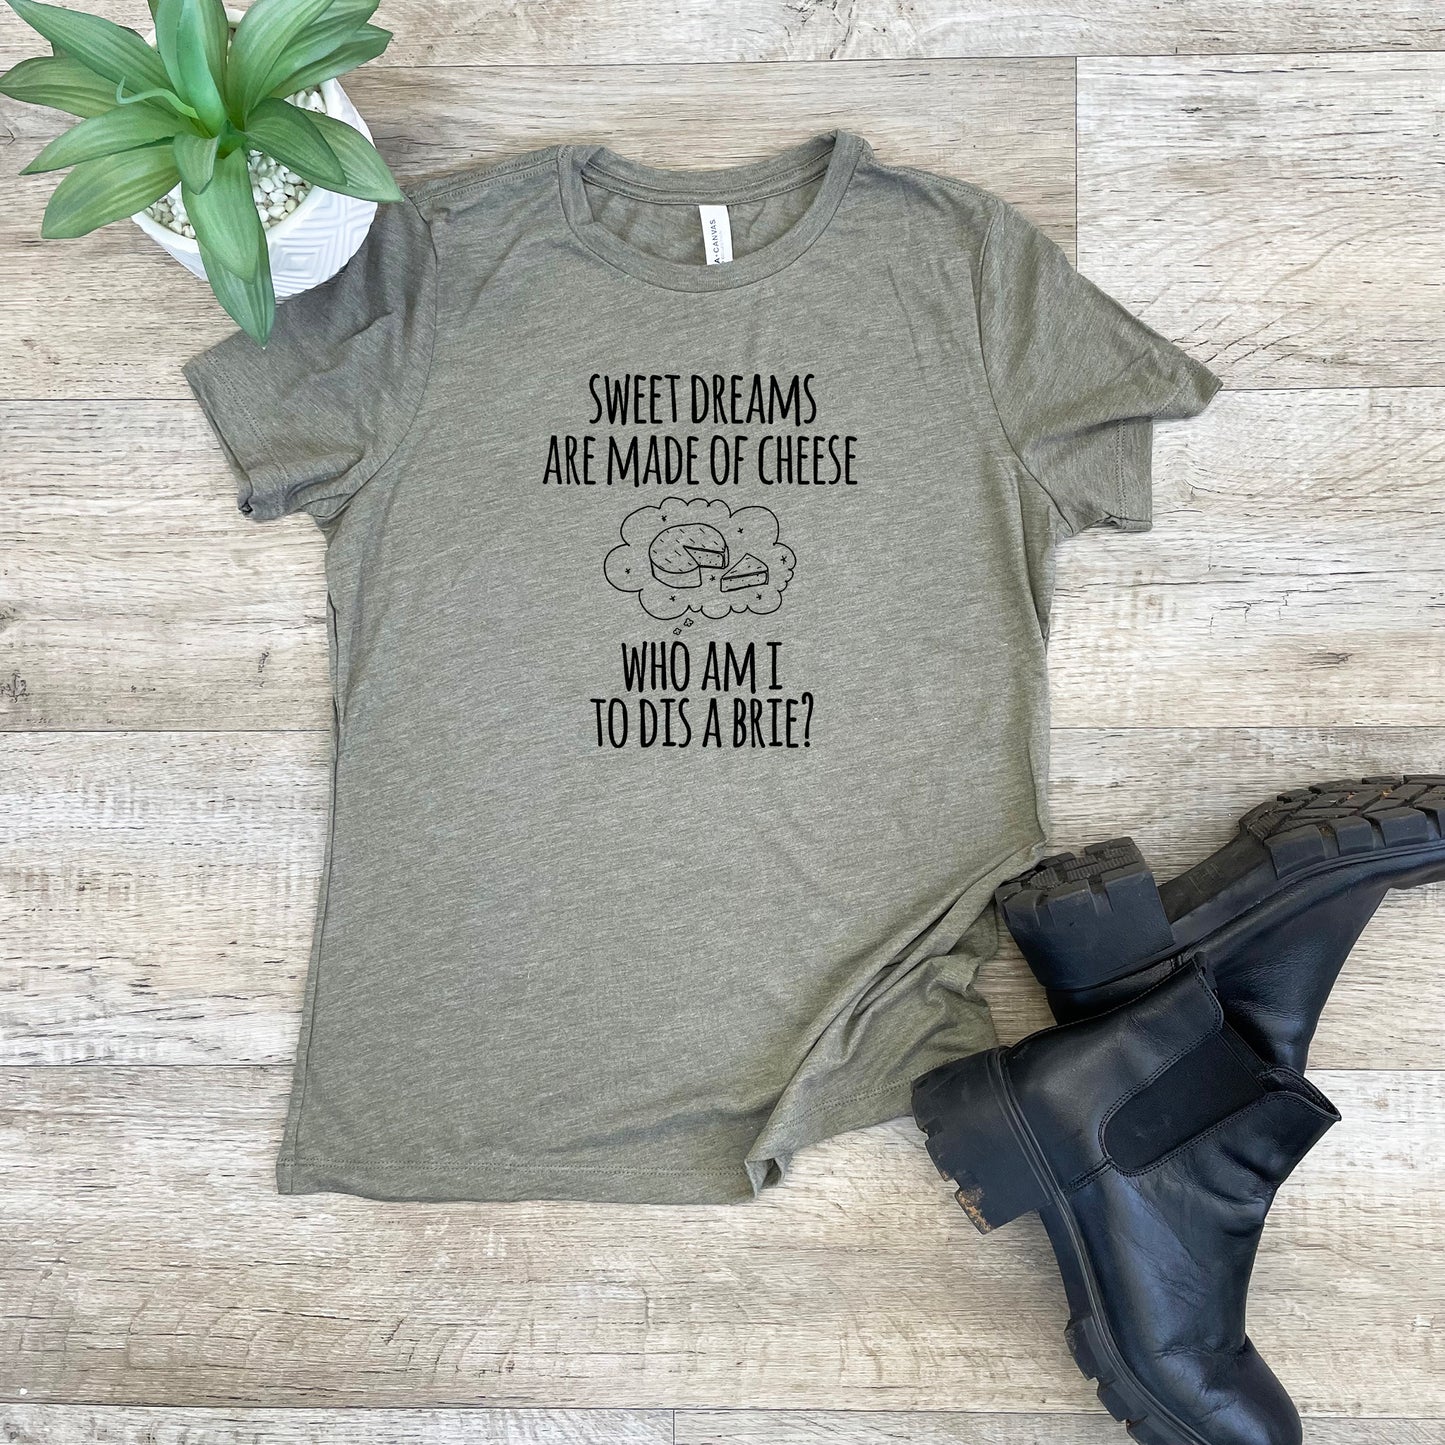 Sweet Dreams Are Made Of Cheese, Who Am I To Dis A Brie? - Women's Crew Tee - Olive or Dusty Blue